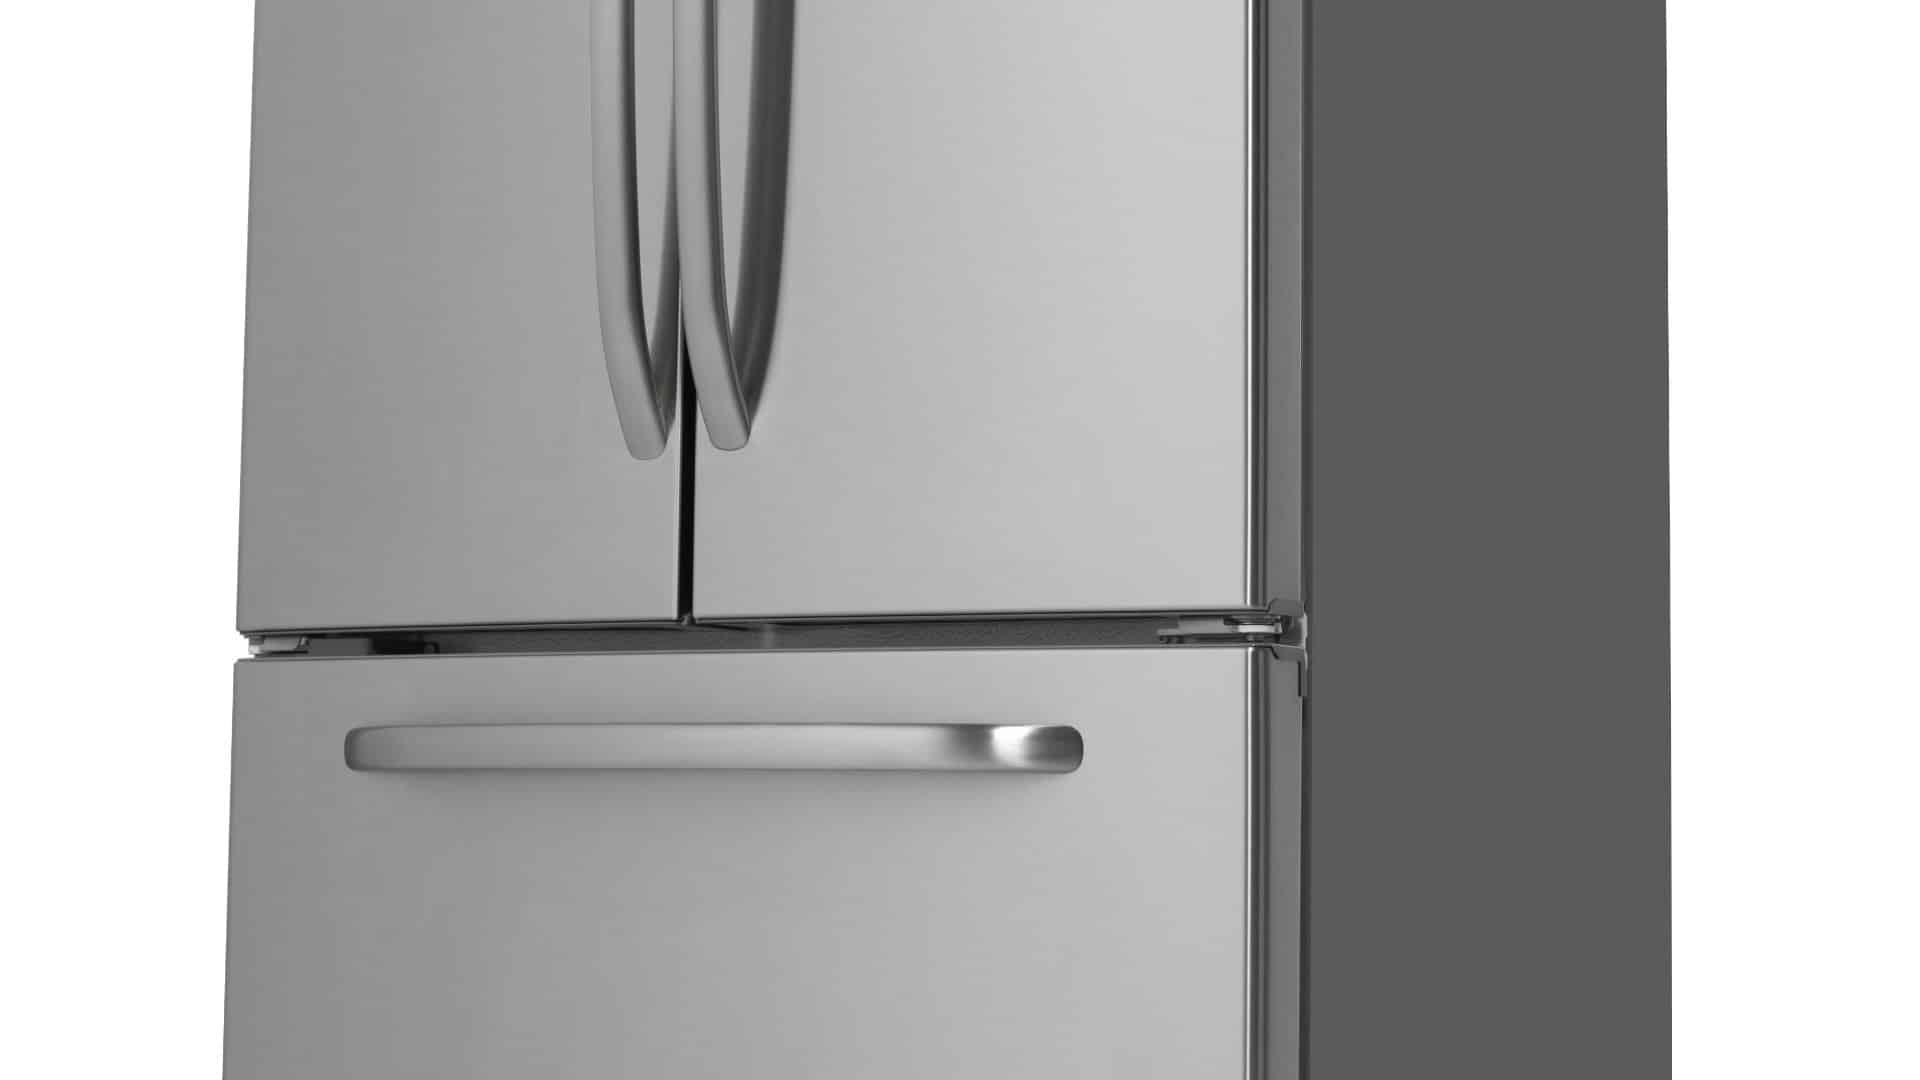 Featured image for “KitchenAid Refrigerator Not Making Ice? Here’s Why”